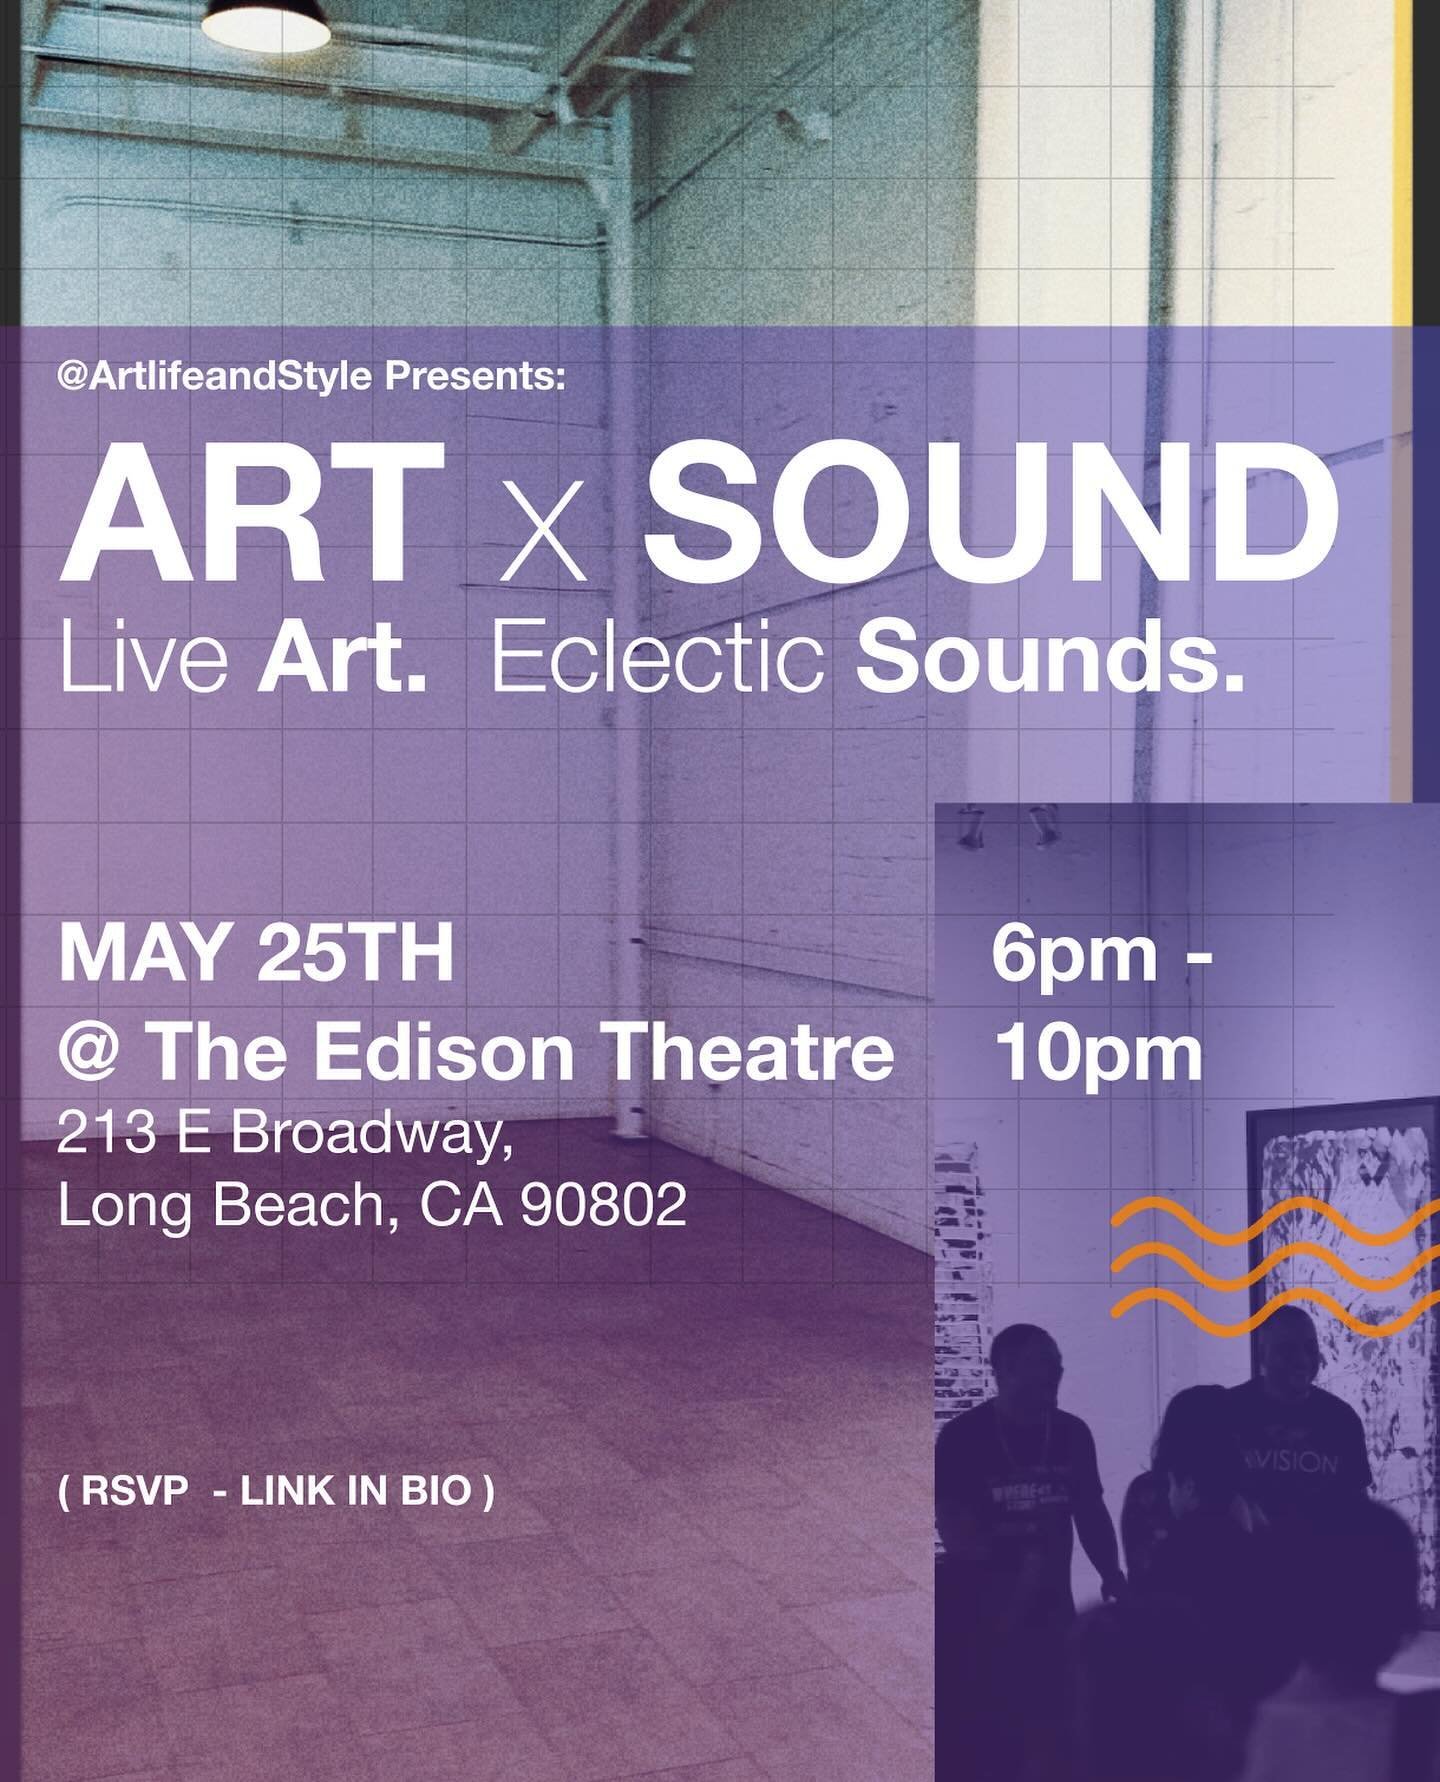 Artlife and Style Proudly Present:
&ldquo;ART x SOUND&rdquo;, a Pop-Up Exhibition at The Edison Theatre in Long Beach. 

Be there. May 25th!

As a brilliant group of local artists invite us into their creative process and create art real time &mdash;